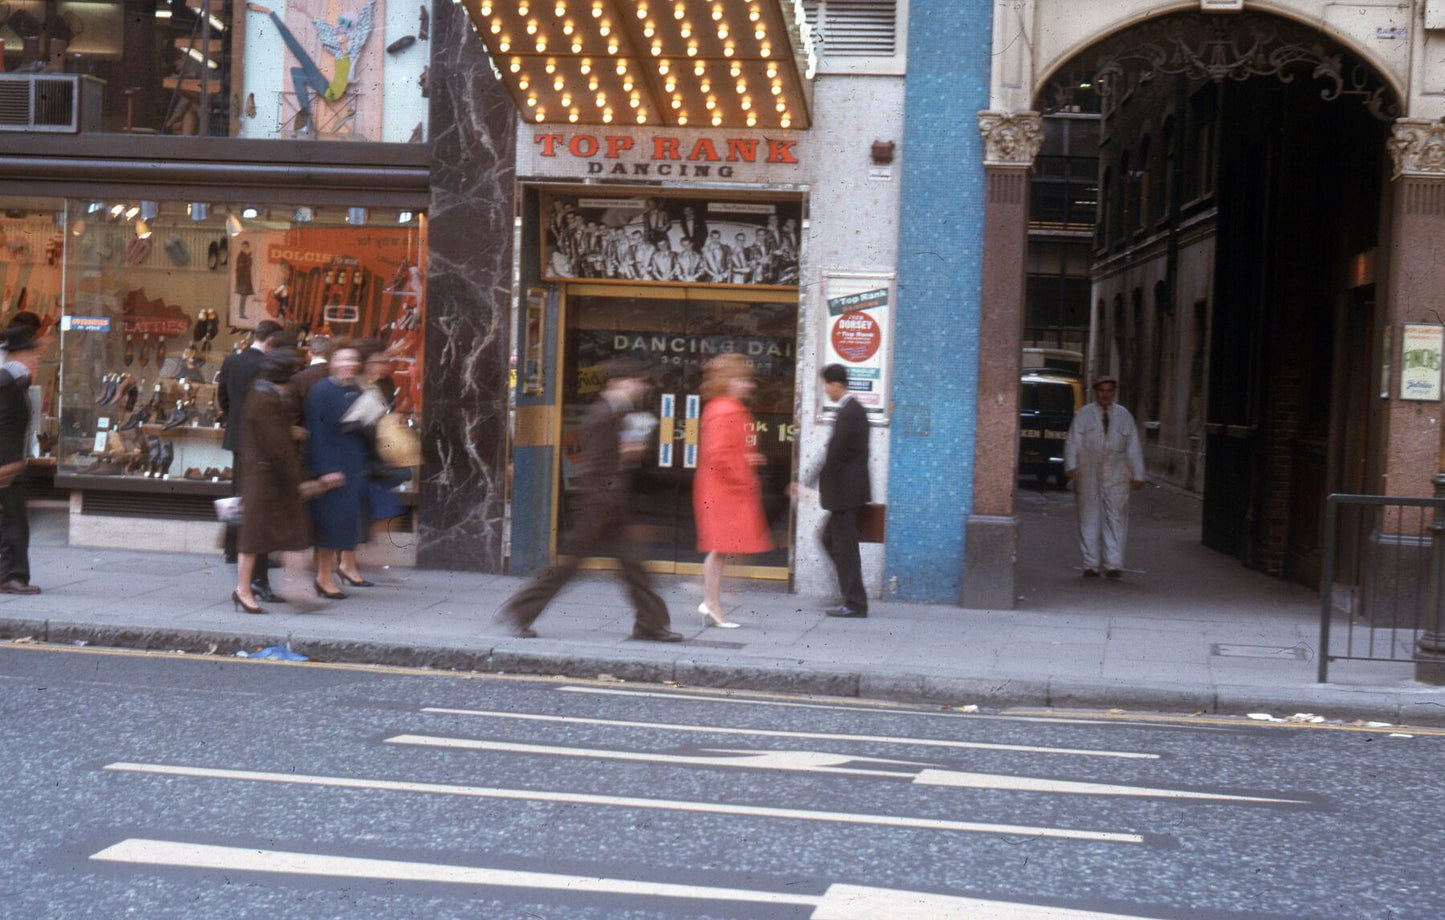 Top Rank Dancing on Charing Cross Road, London by Bob Hyde. Taken in the 1960s.